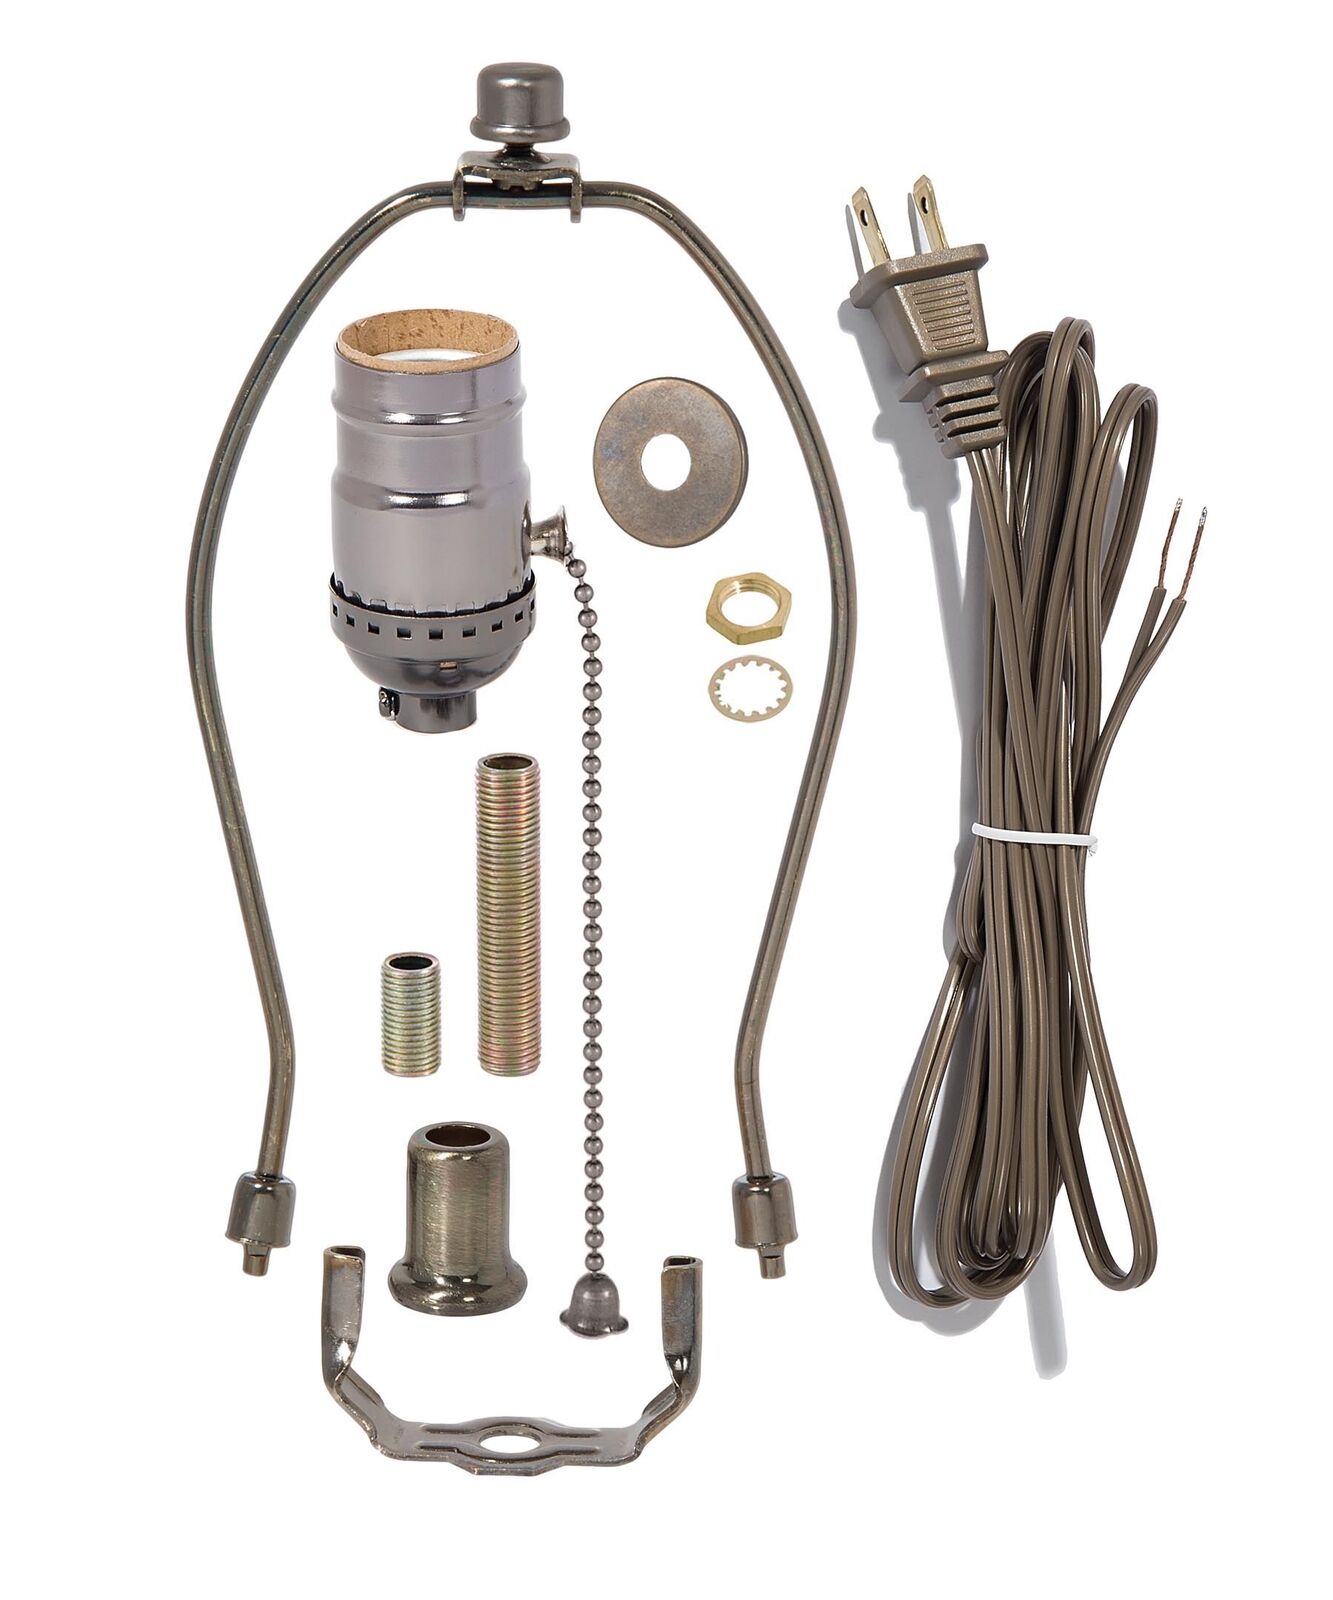 B&P Lamp® Antique Bronze Finish Table Lamp Wiring Kit With a 6 Inch Harp and